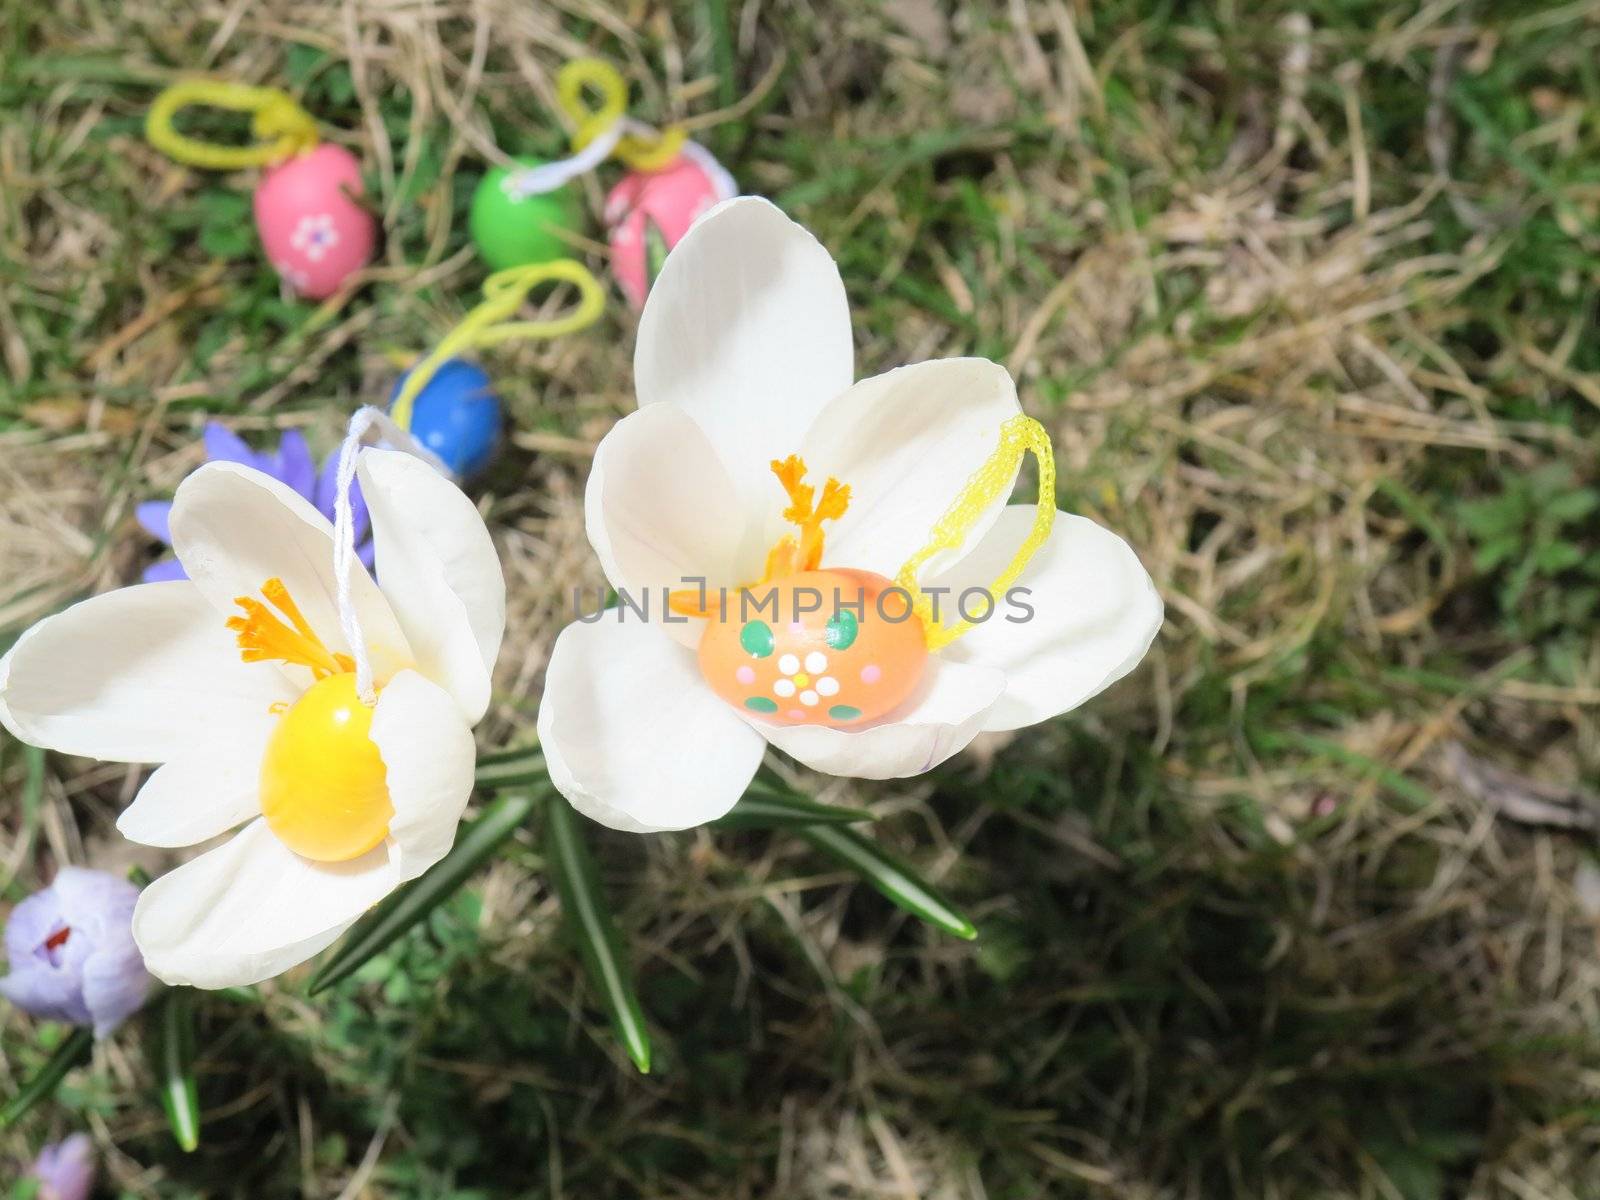 Easter eggs in front of crocuses